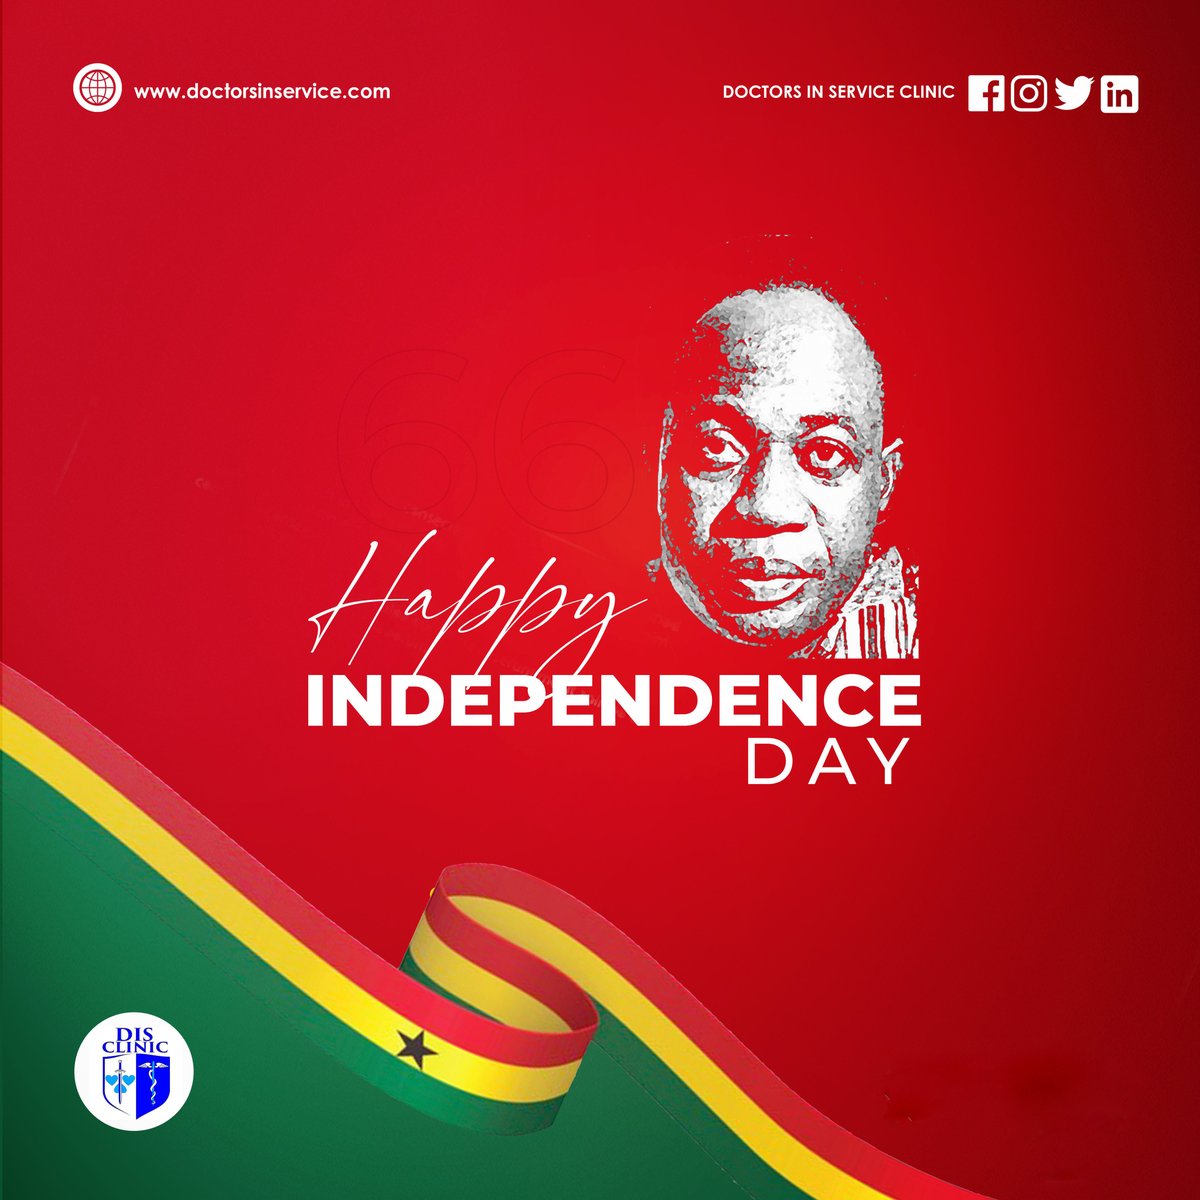 The forces that unite us are intrinsic and greater than the superimposed influences that keep us apart. - Dr. Kwame Nkrumah #disclinic #independenceday #Ghanaat67